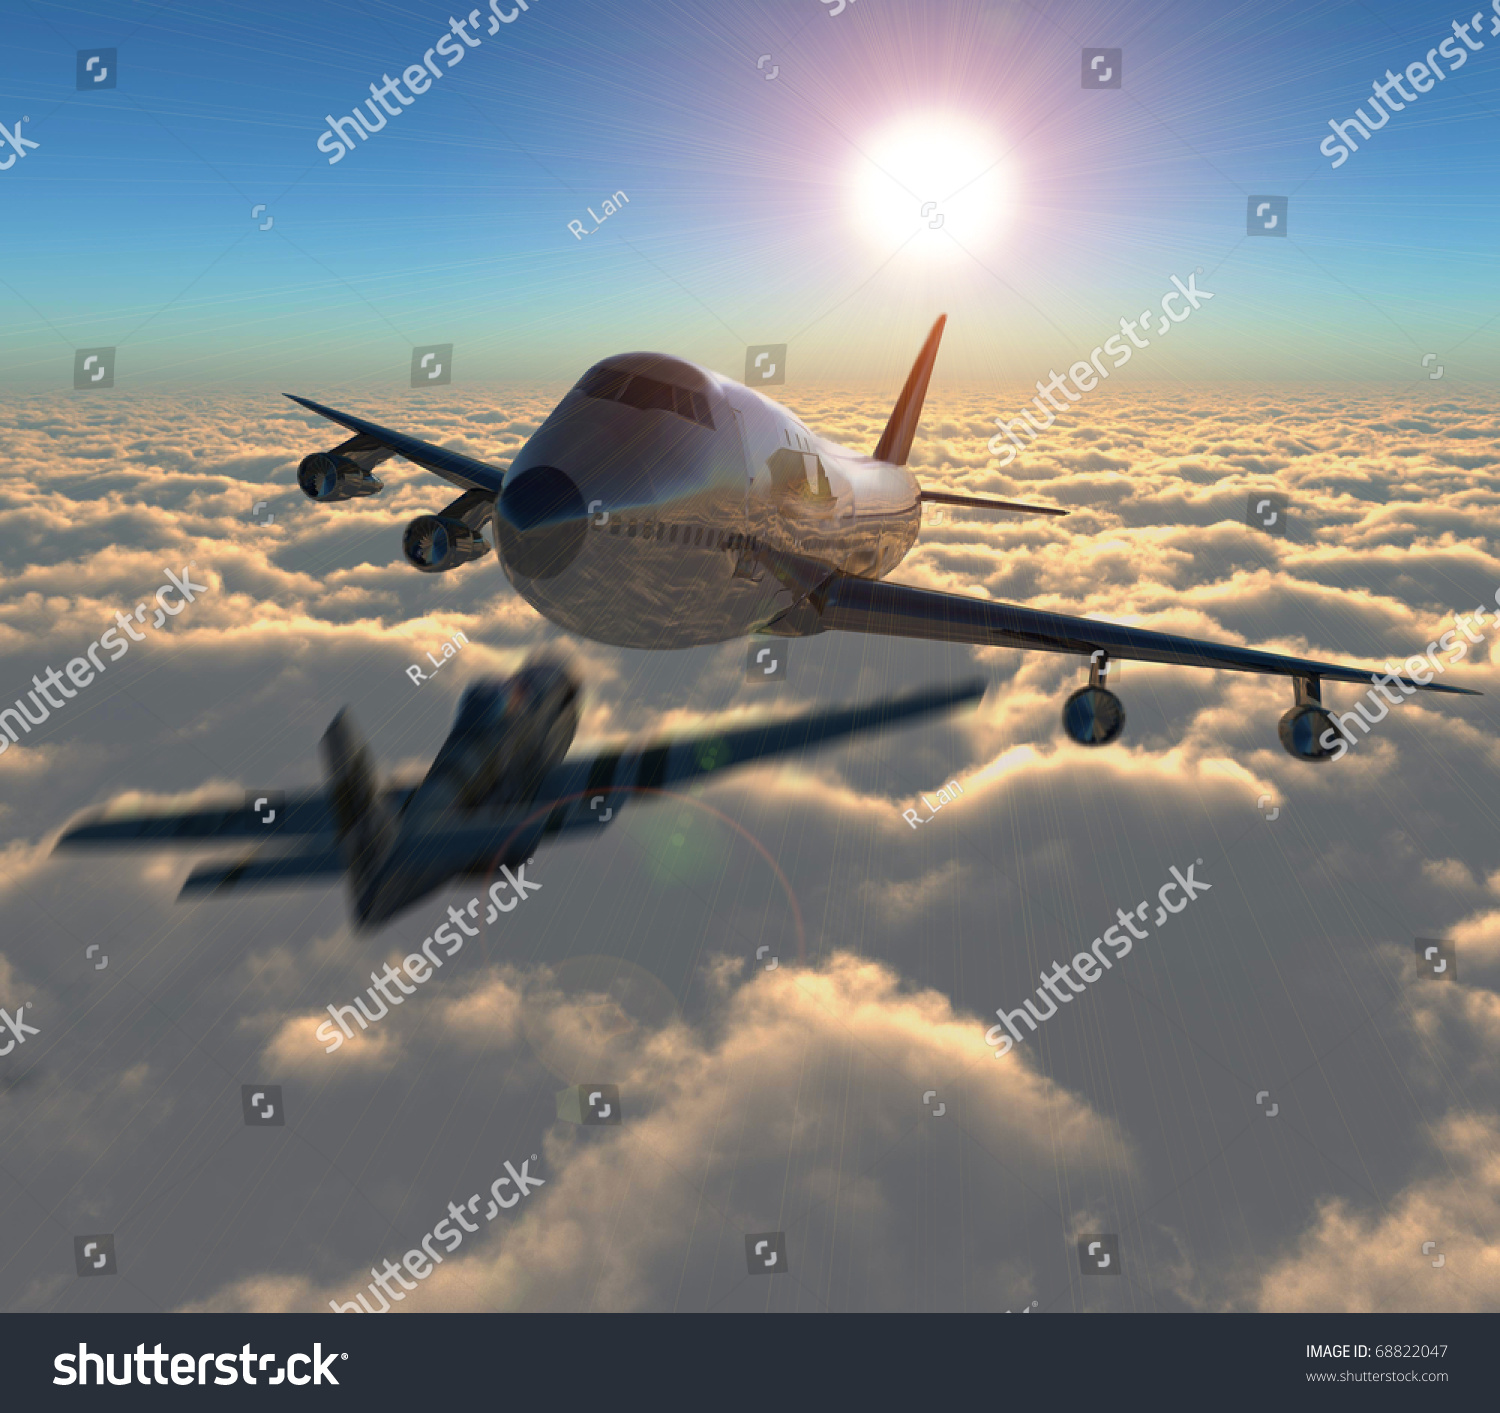 Threedimensional Two Planes Flying Each Other Stock Illustration ...